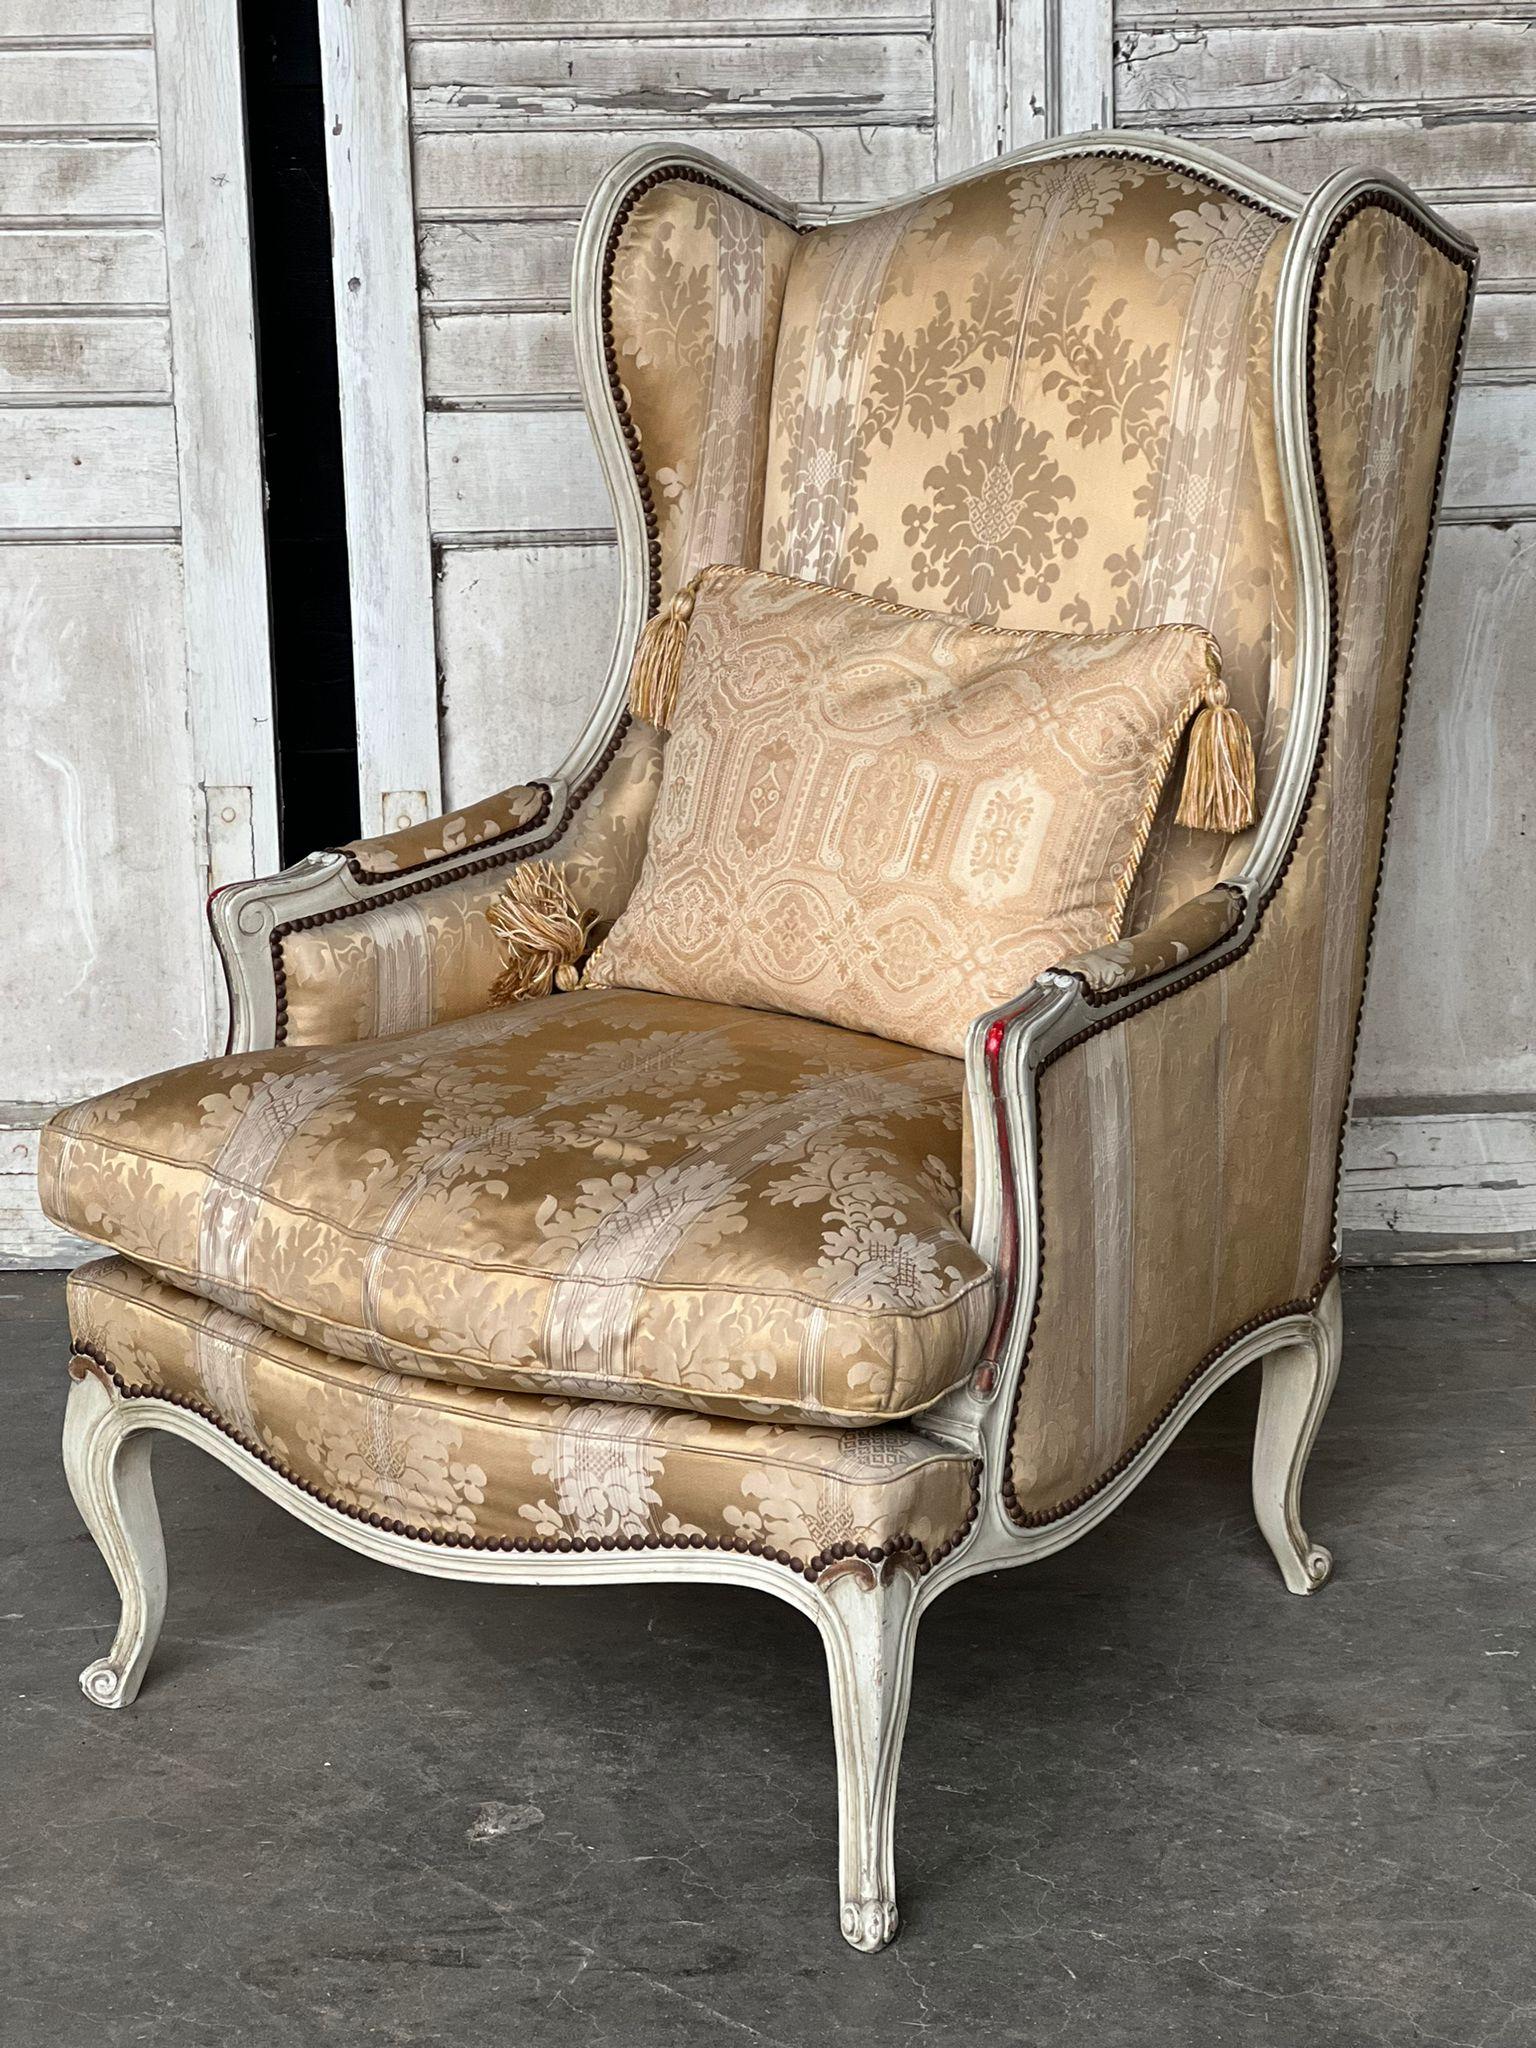 A rare French Wing Bergere armchair which I can vouch for being extremely comfortable having been at home for a year! Also has generous proportions.
The frame is strong and sturdy and has its original finish and patina which is slightly worn just